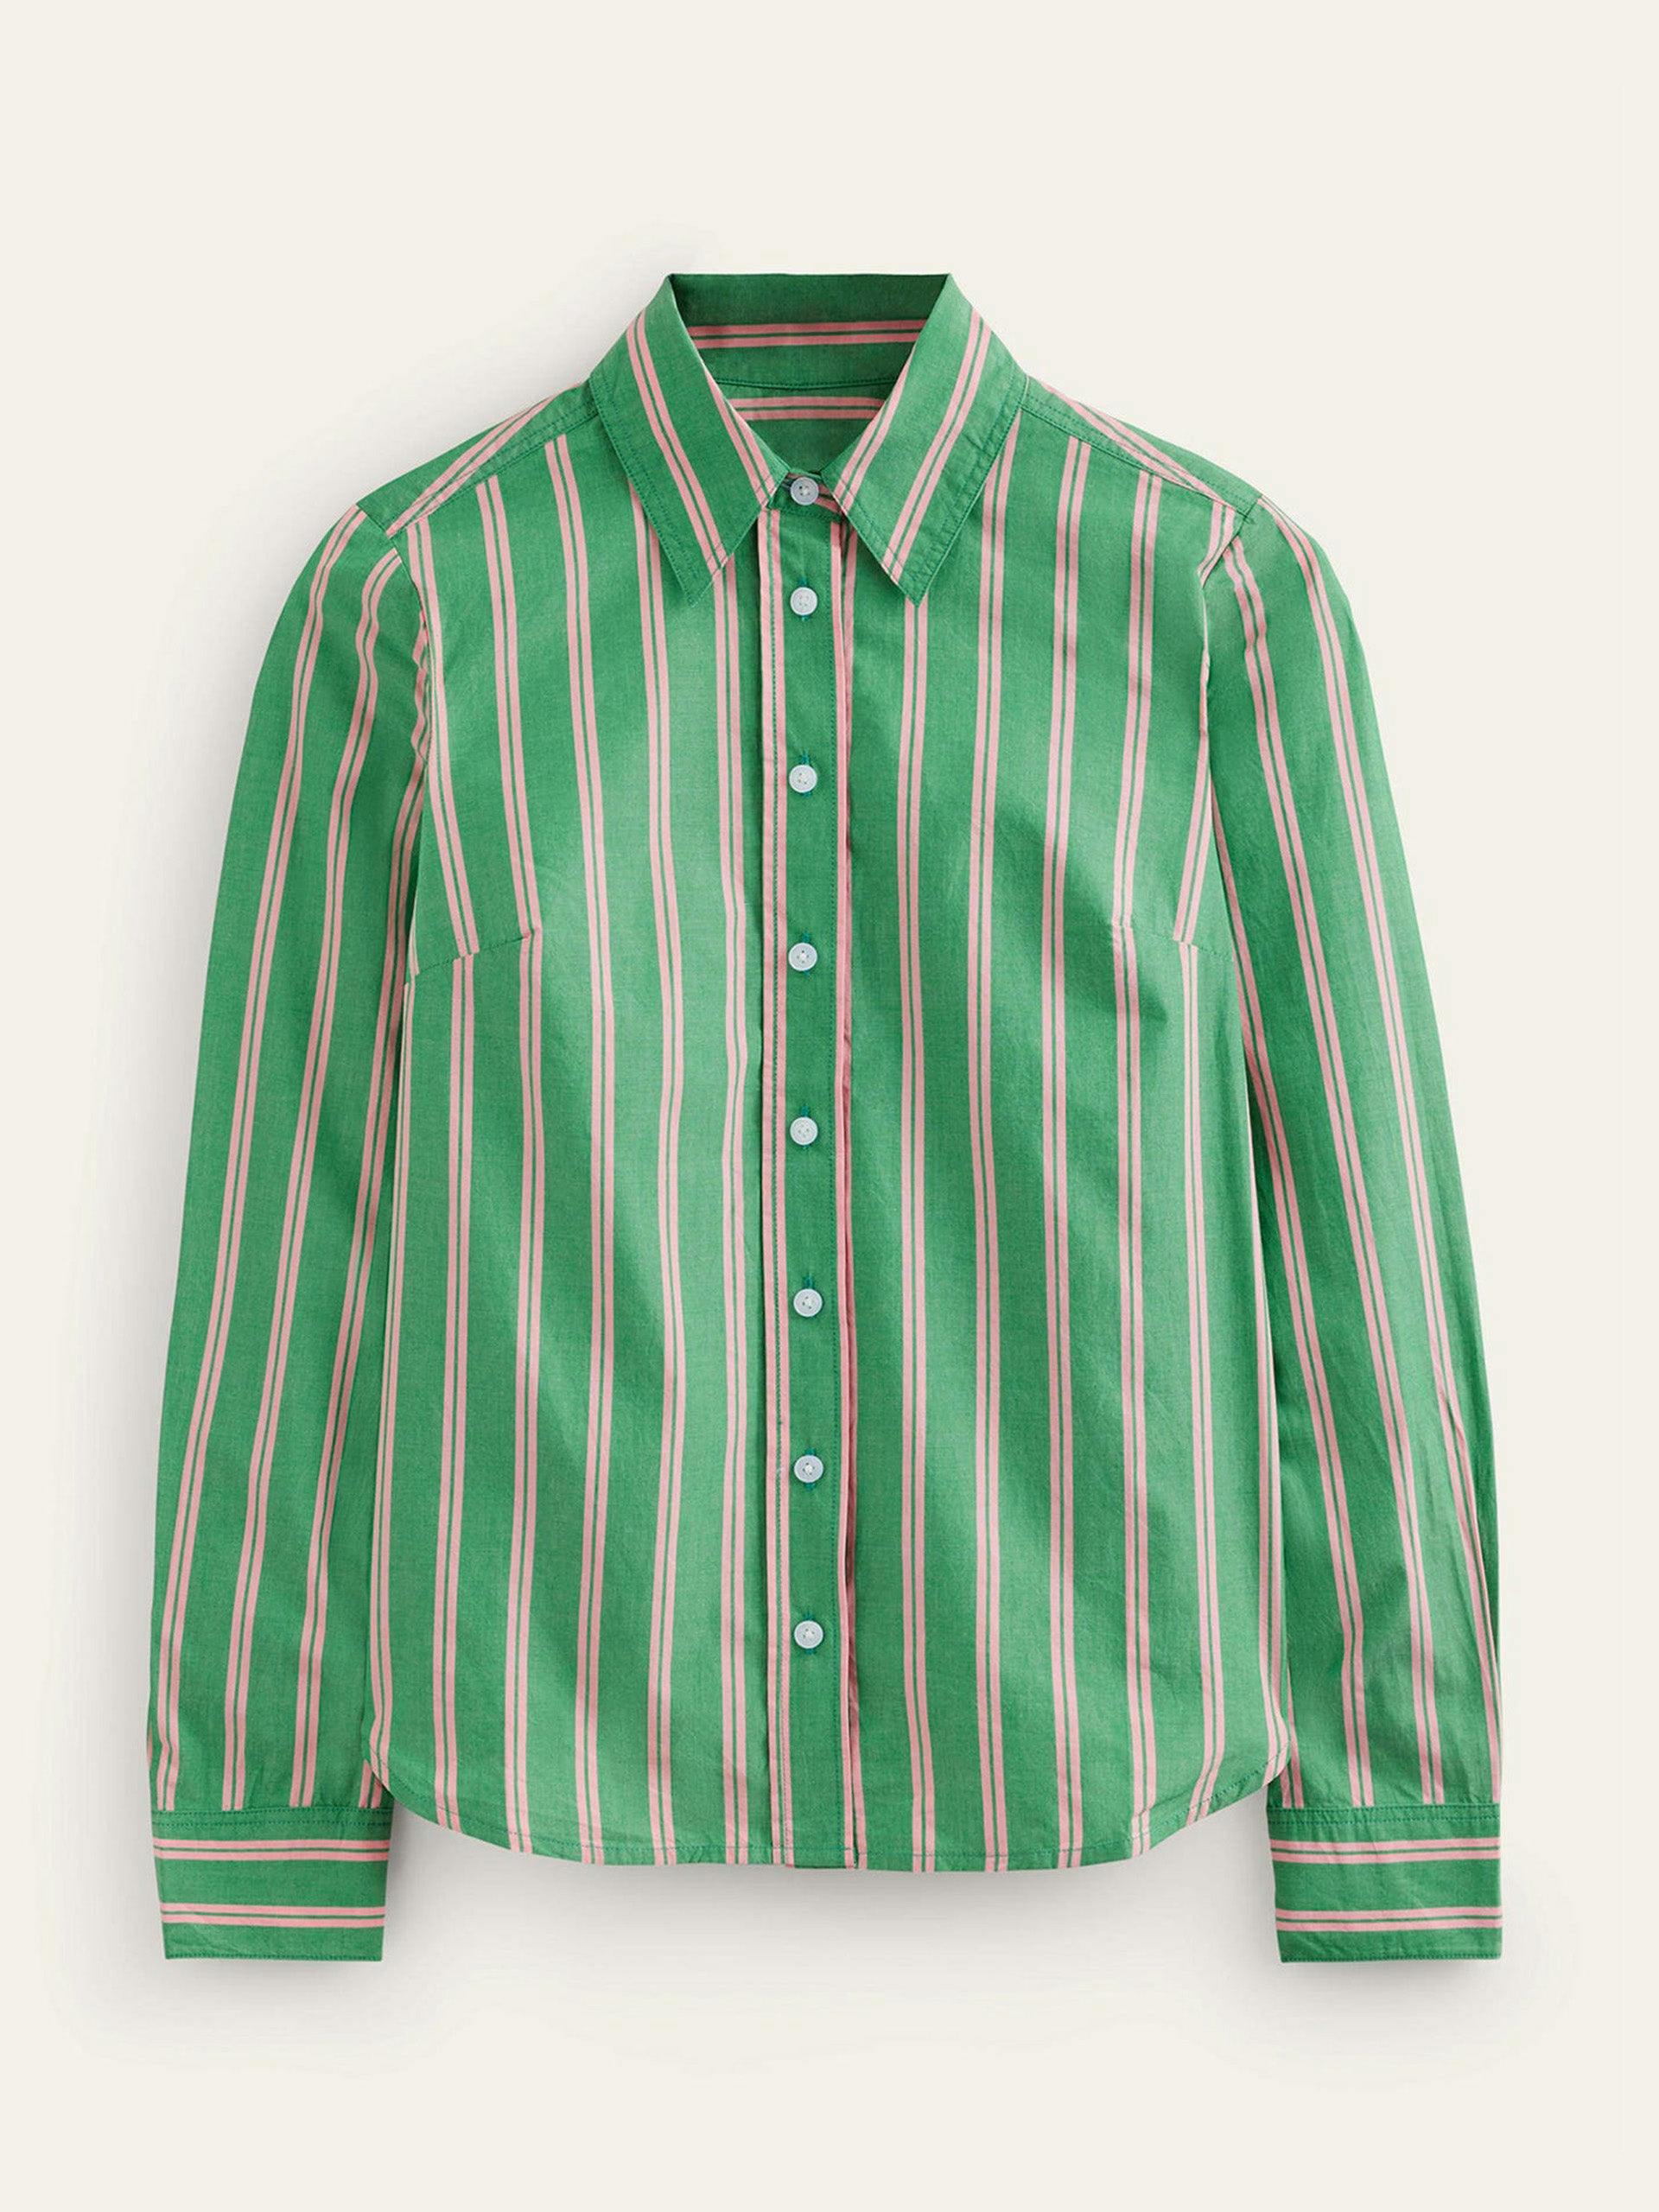 Green and pink striped cotton shirt